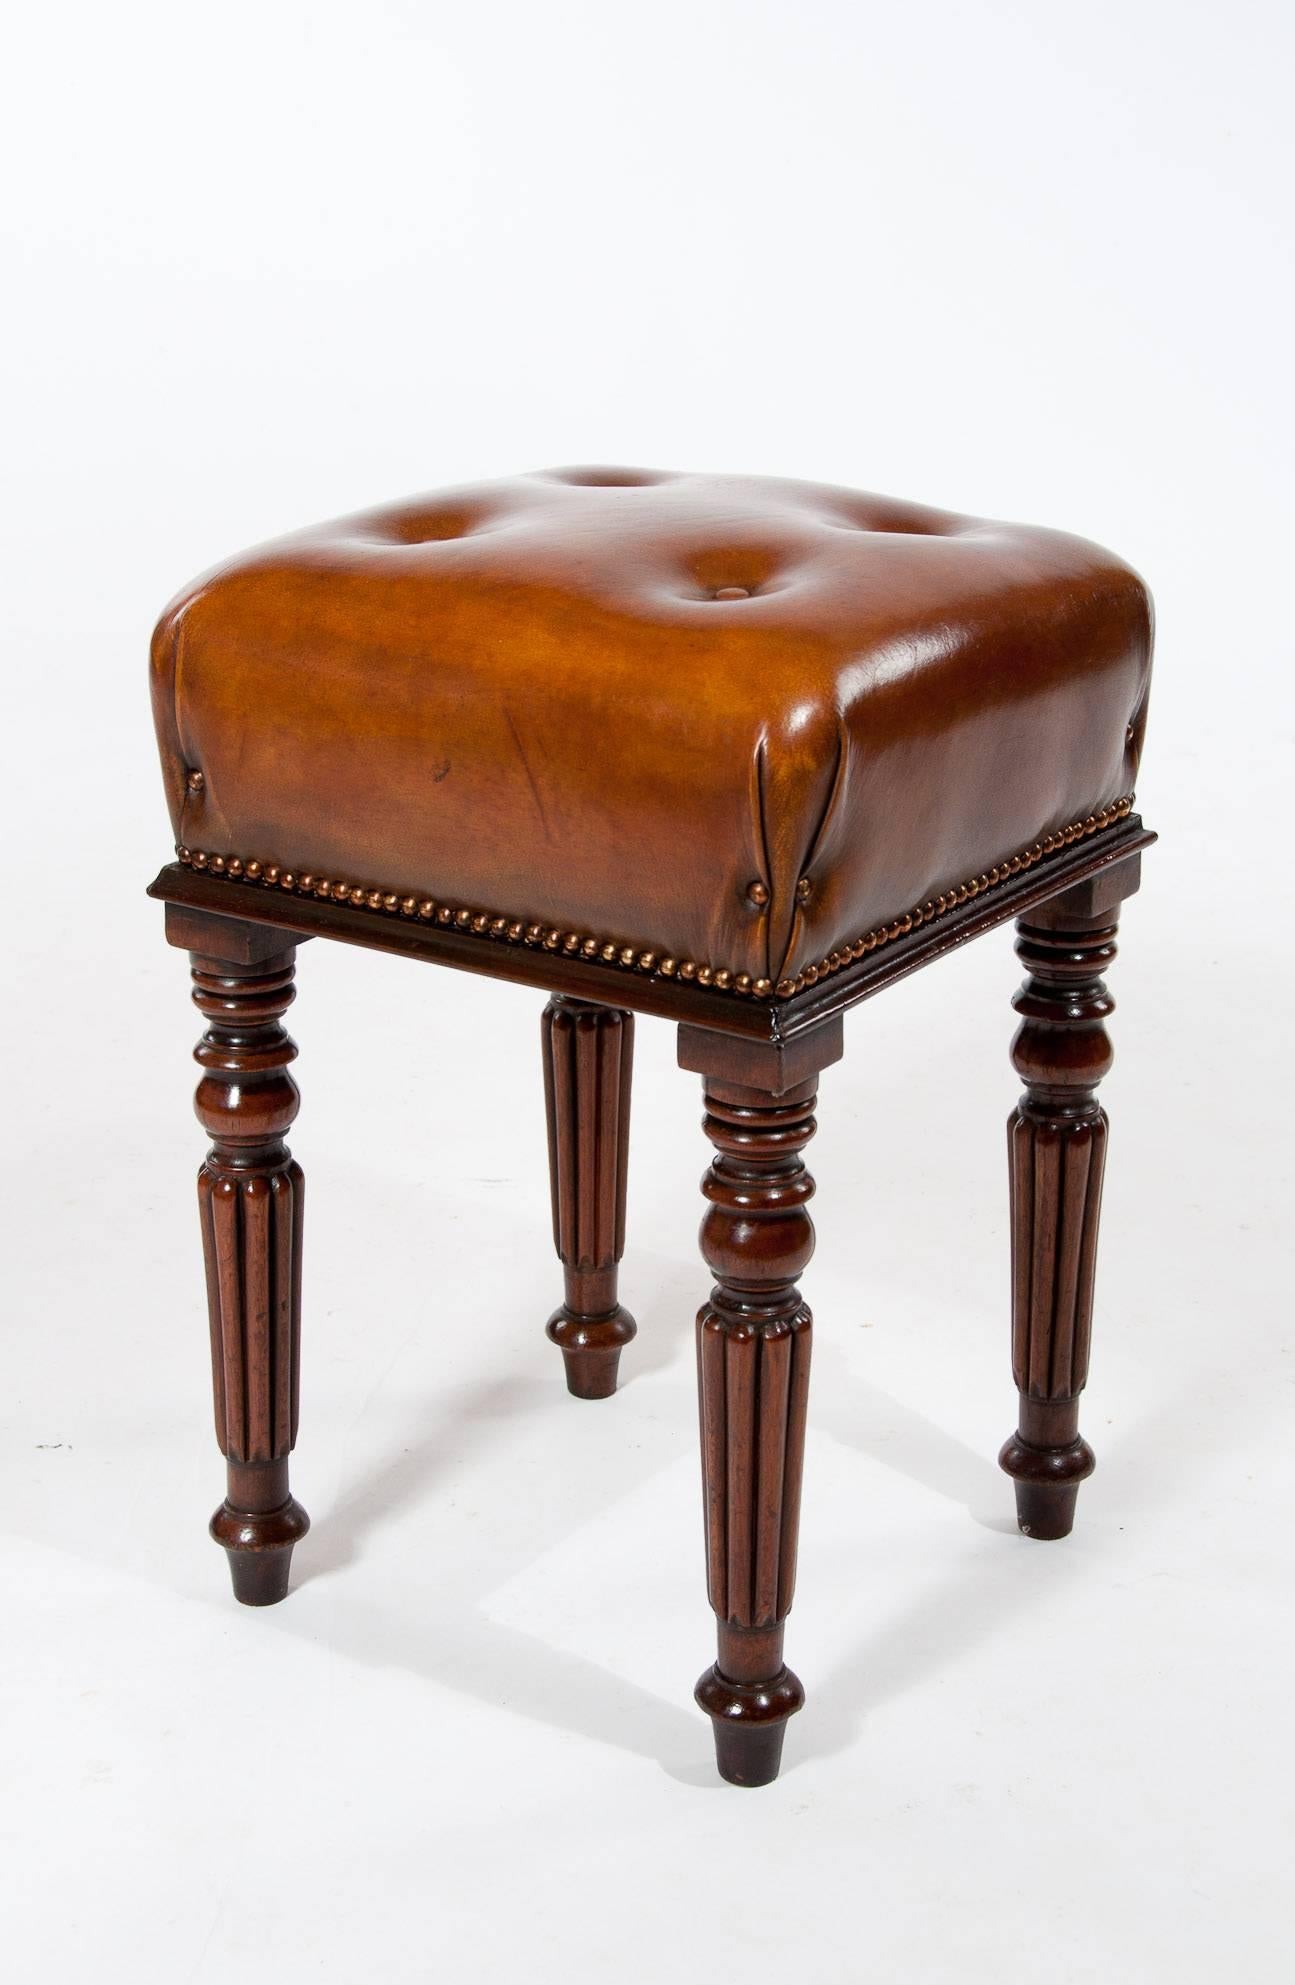 A very fine quality Regency/William IV mahogany reeded leg leather upholstered stool. The top is upholstered in a quality leather hide which has been hand dyed in the traditional manner and shallow buttoned with a brass nailed studded finish.